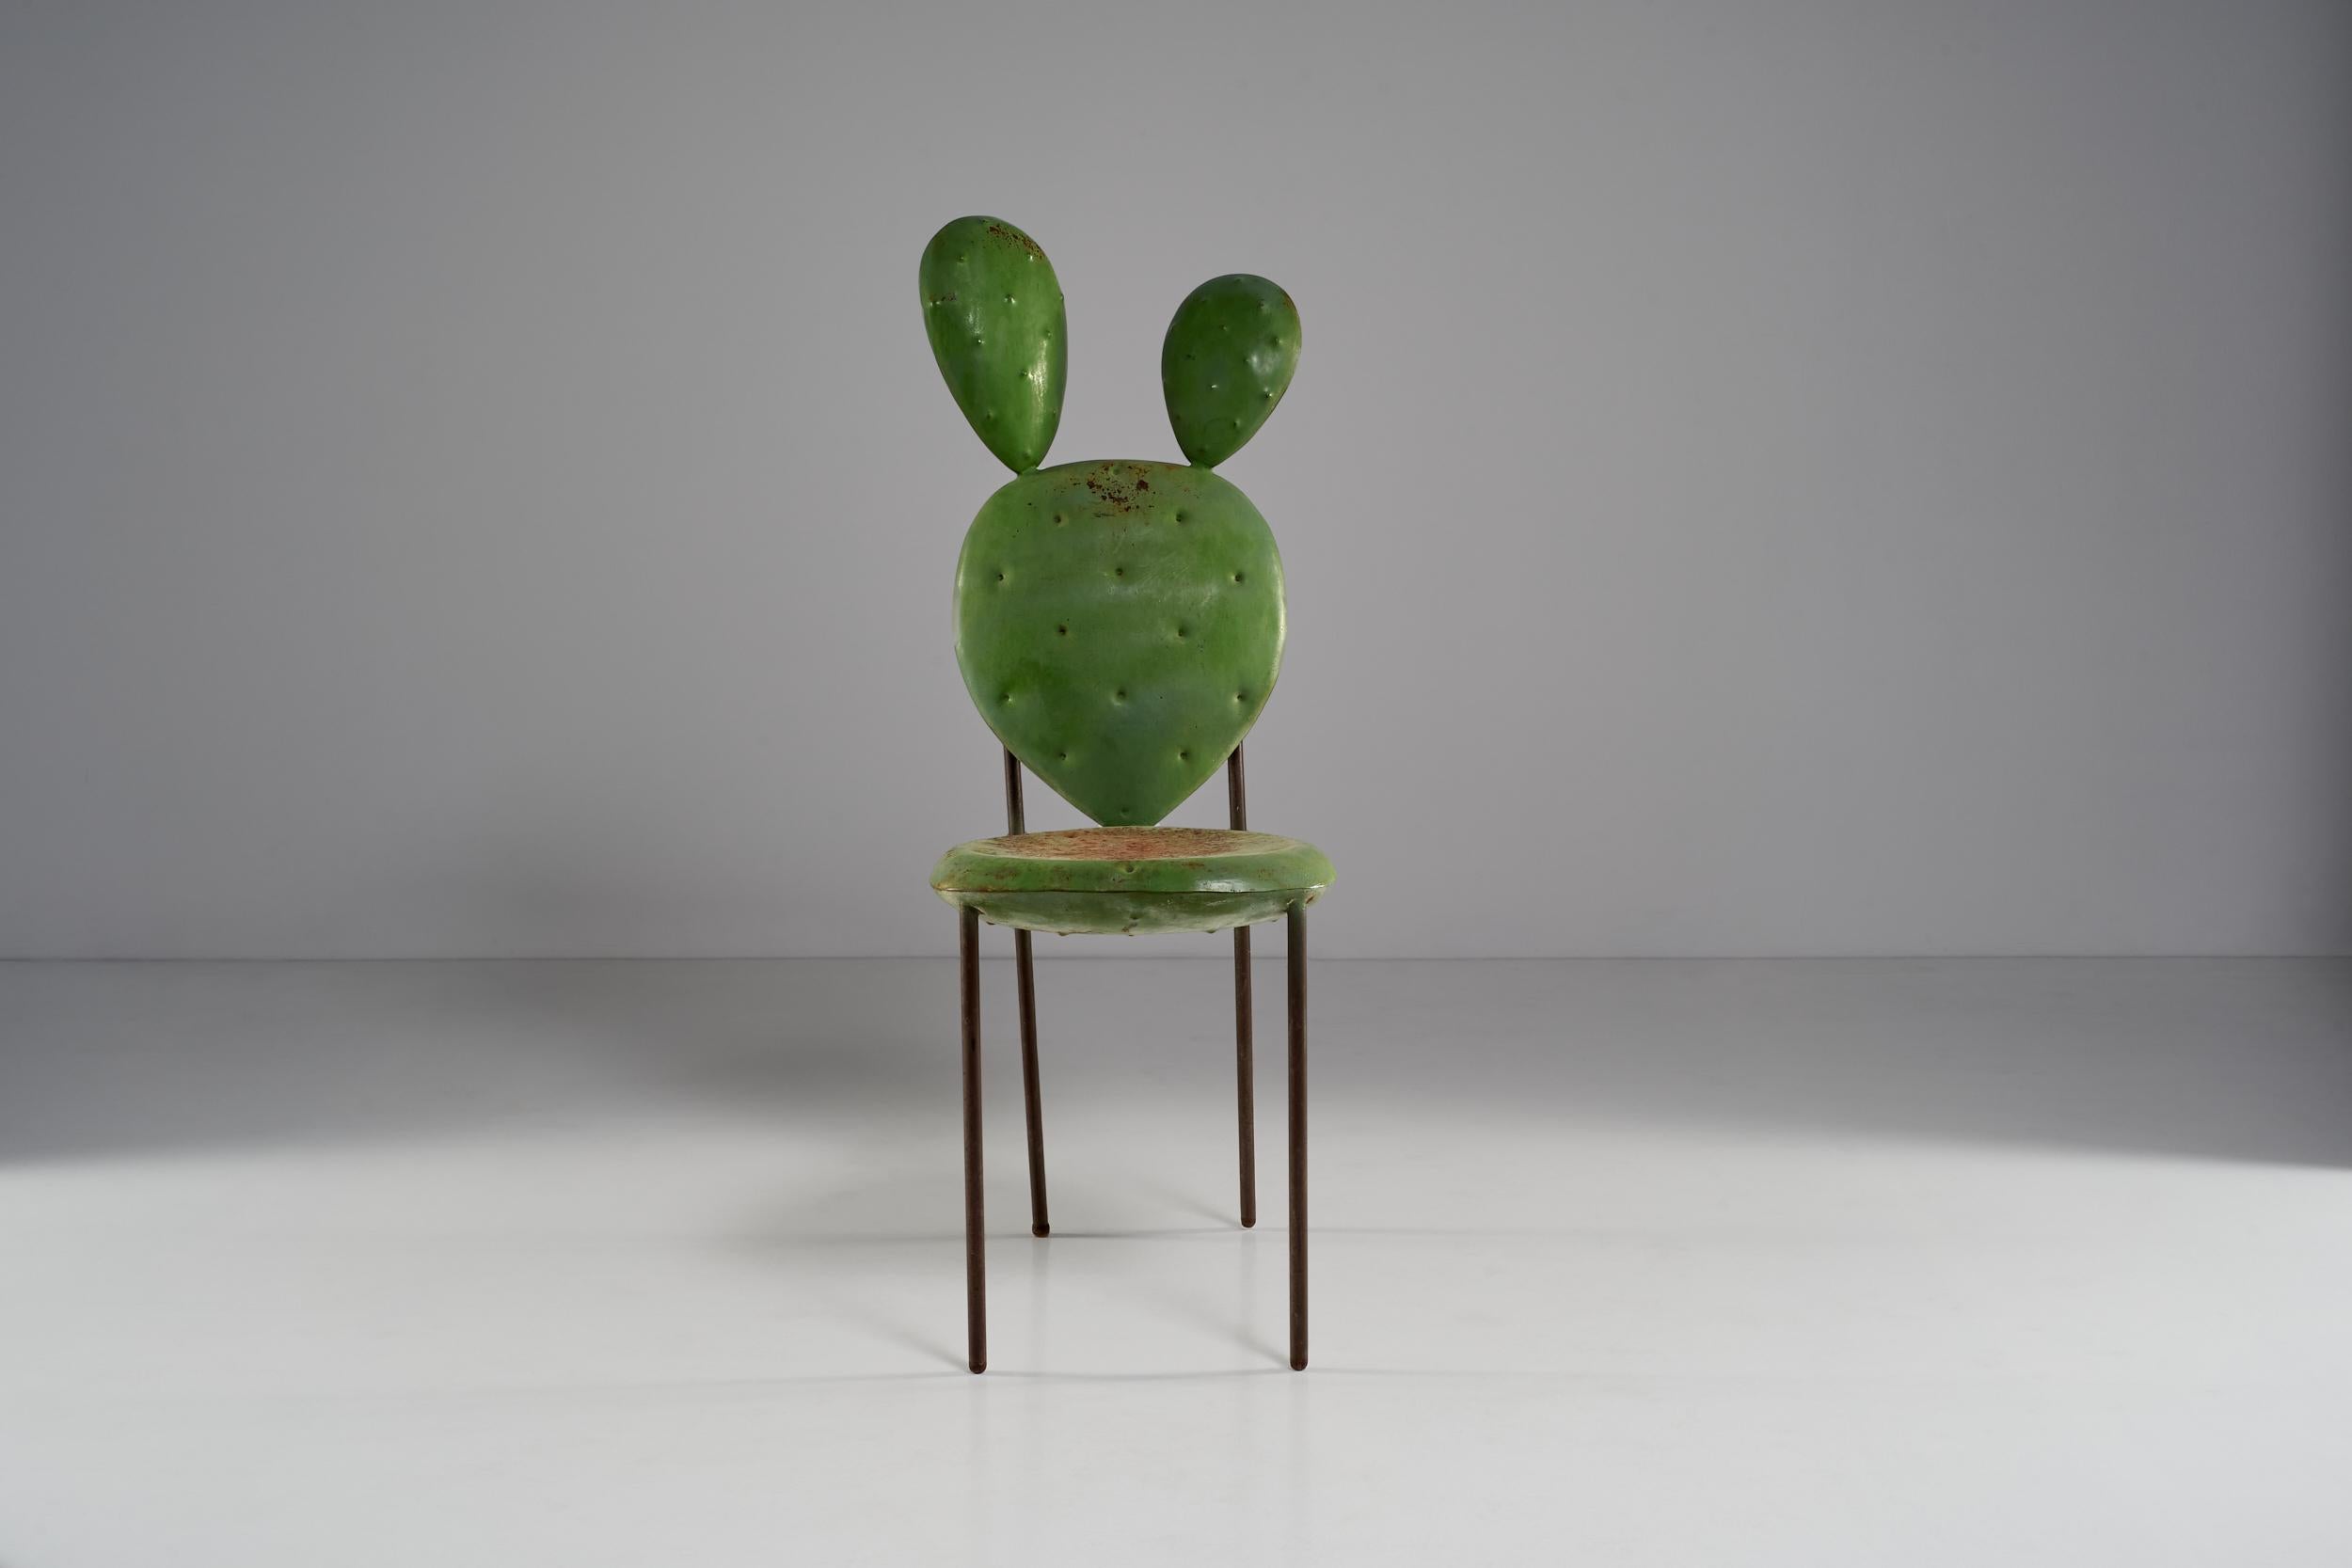 This creative chair goes beyond its functional element: the metal structure plays with vegetable-like elements reshaping the classic chairs into something interesting and funny.